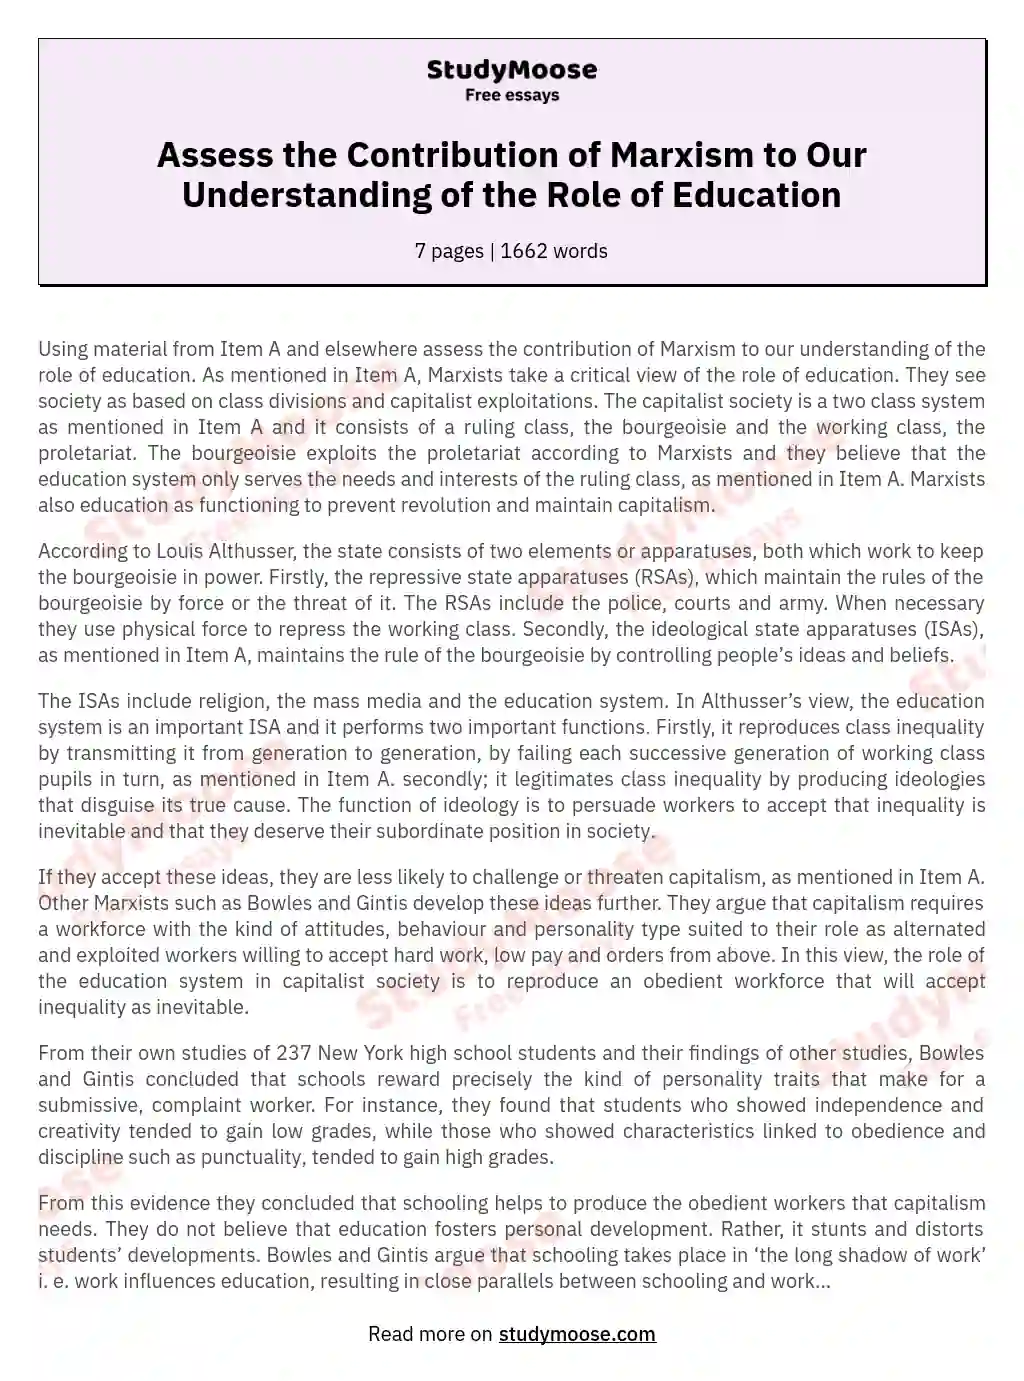 marxism and education essay